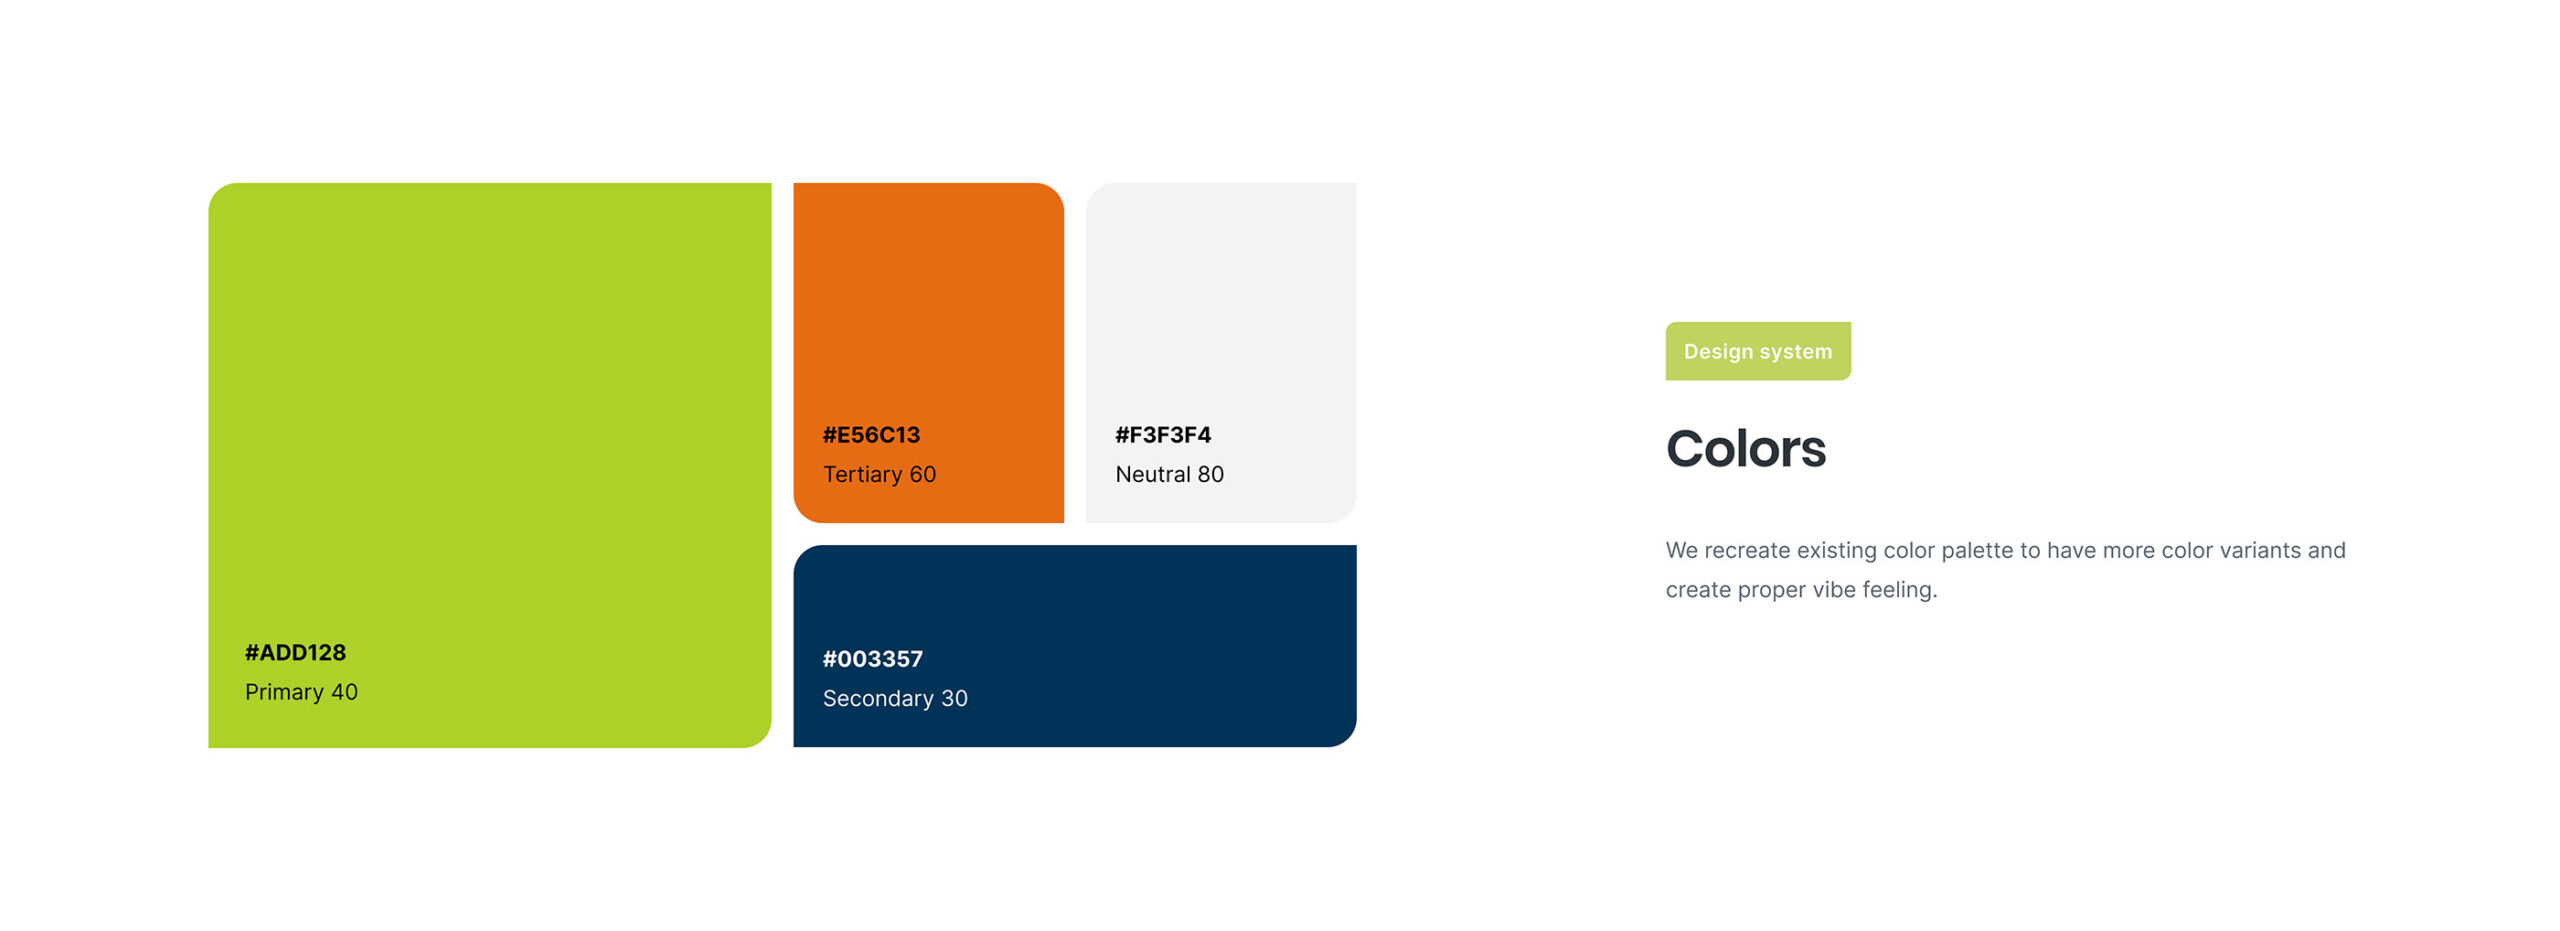 A colour palette for Green Our Planet, vibrant green and orange paired with navy and white.